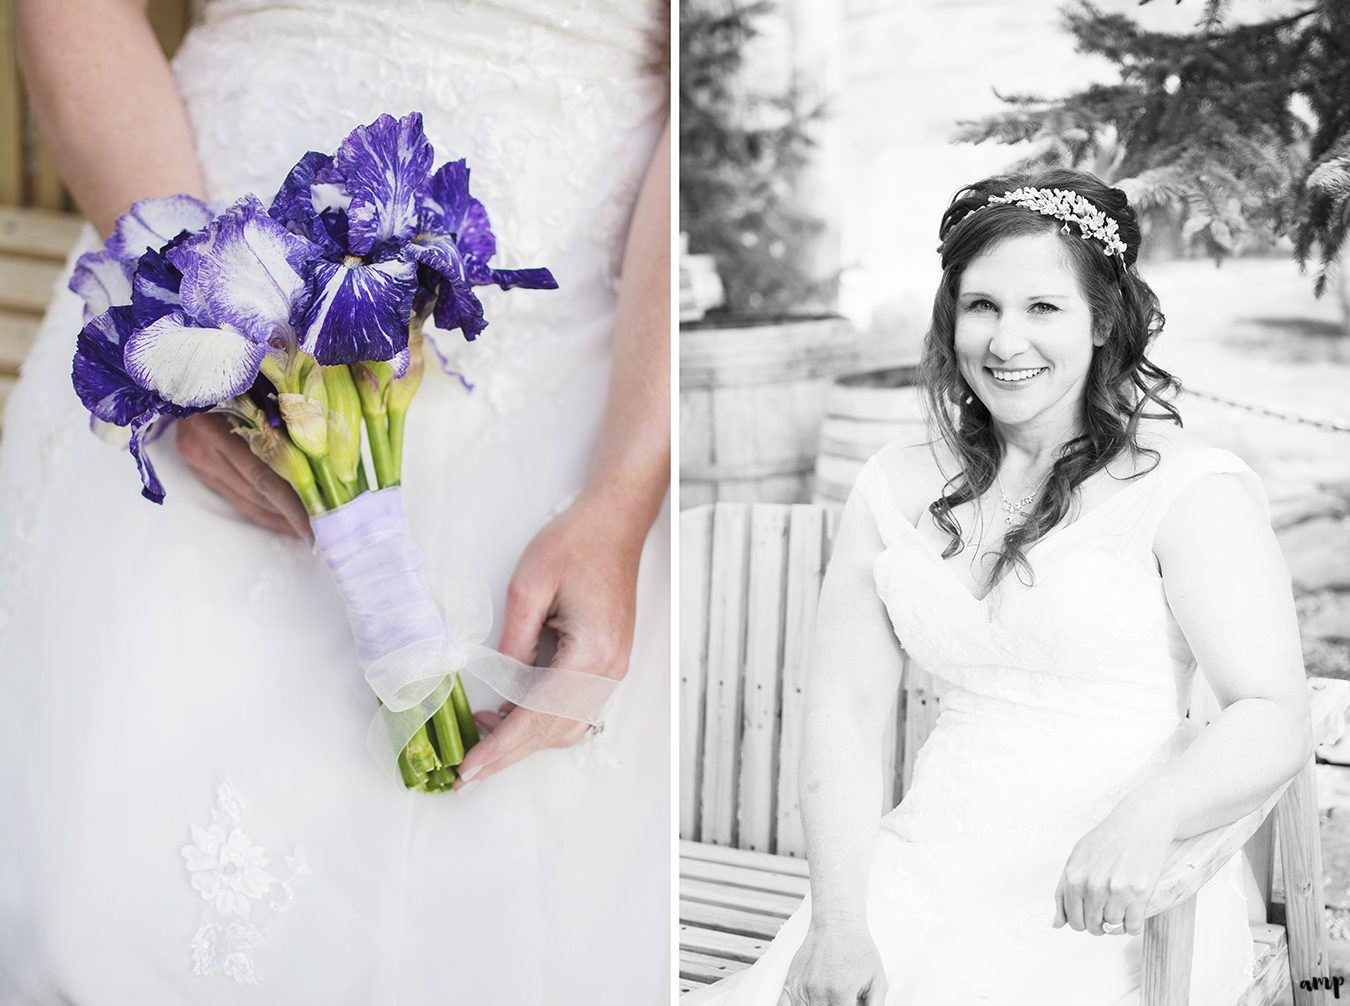 Black and white photo of Bride and photo of her purple irises bouquet